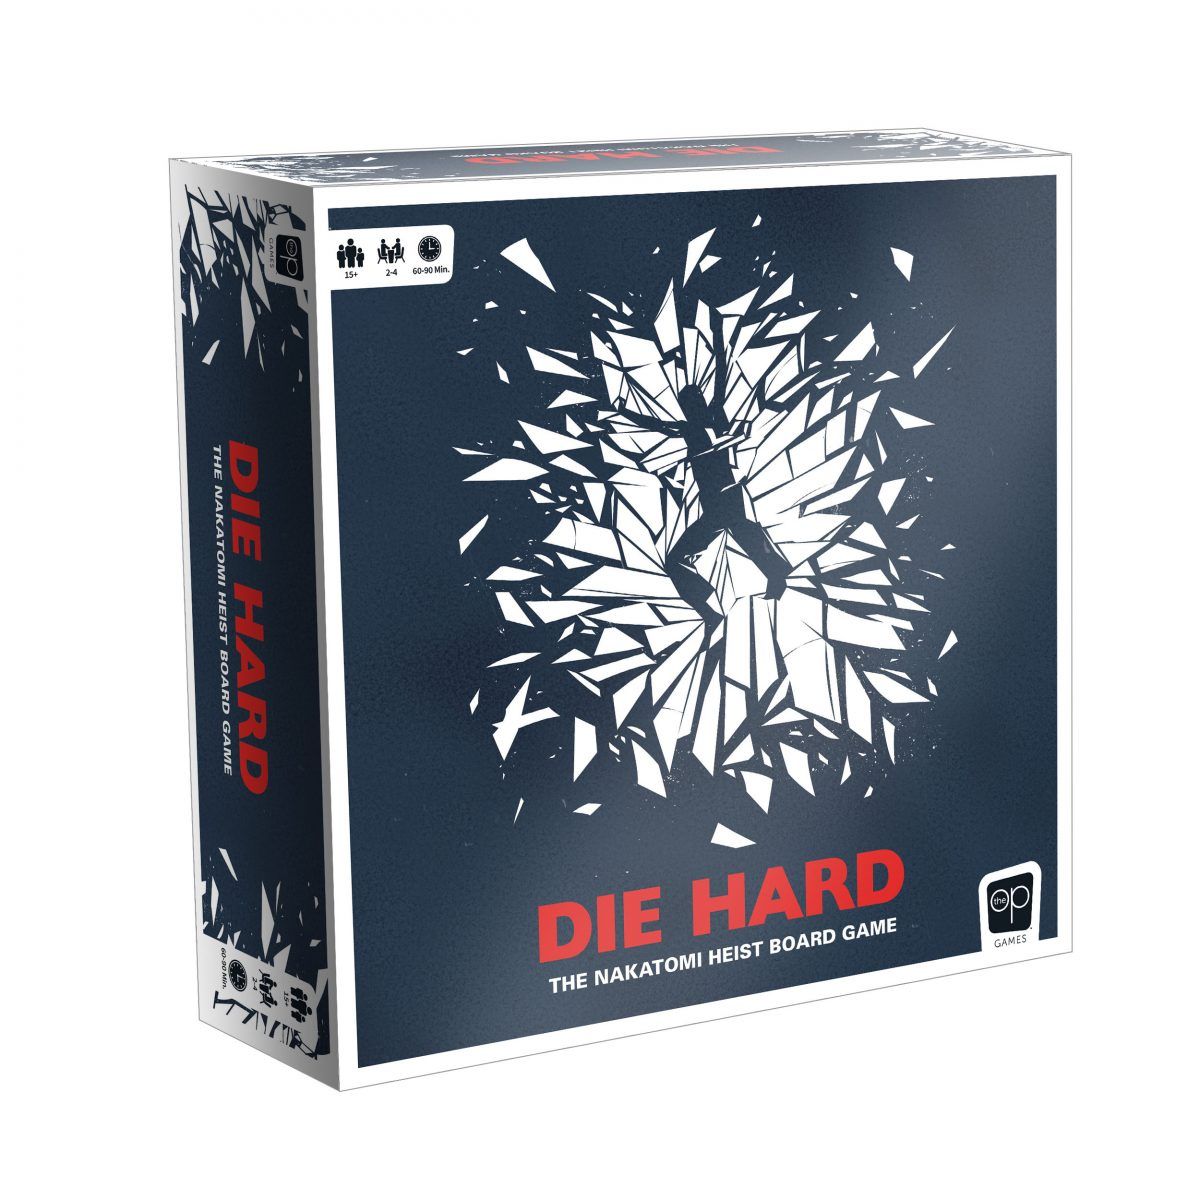 Die Hard Getting An Officially Licensed Tabletop Game